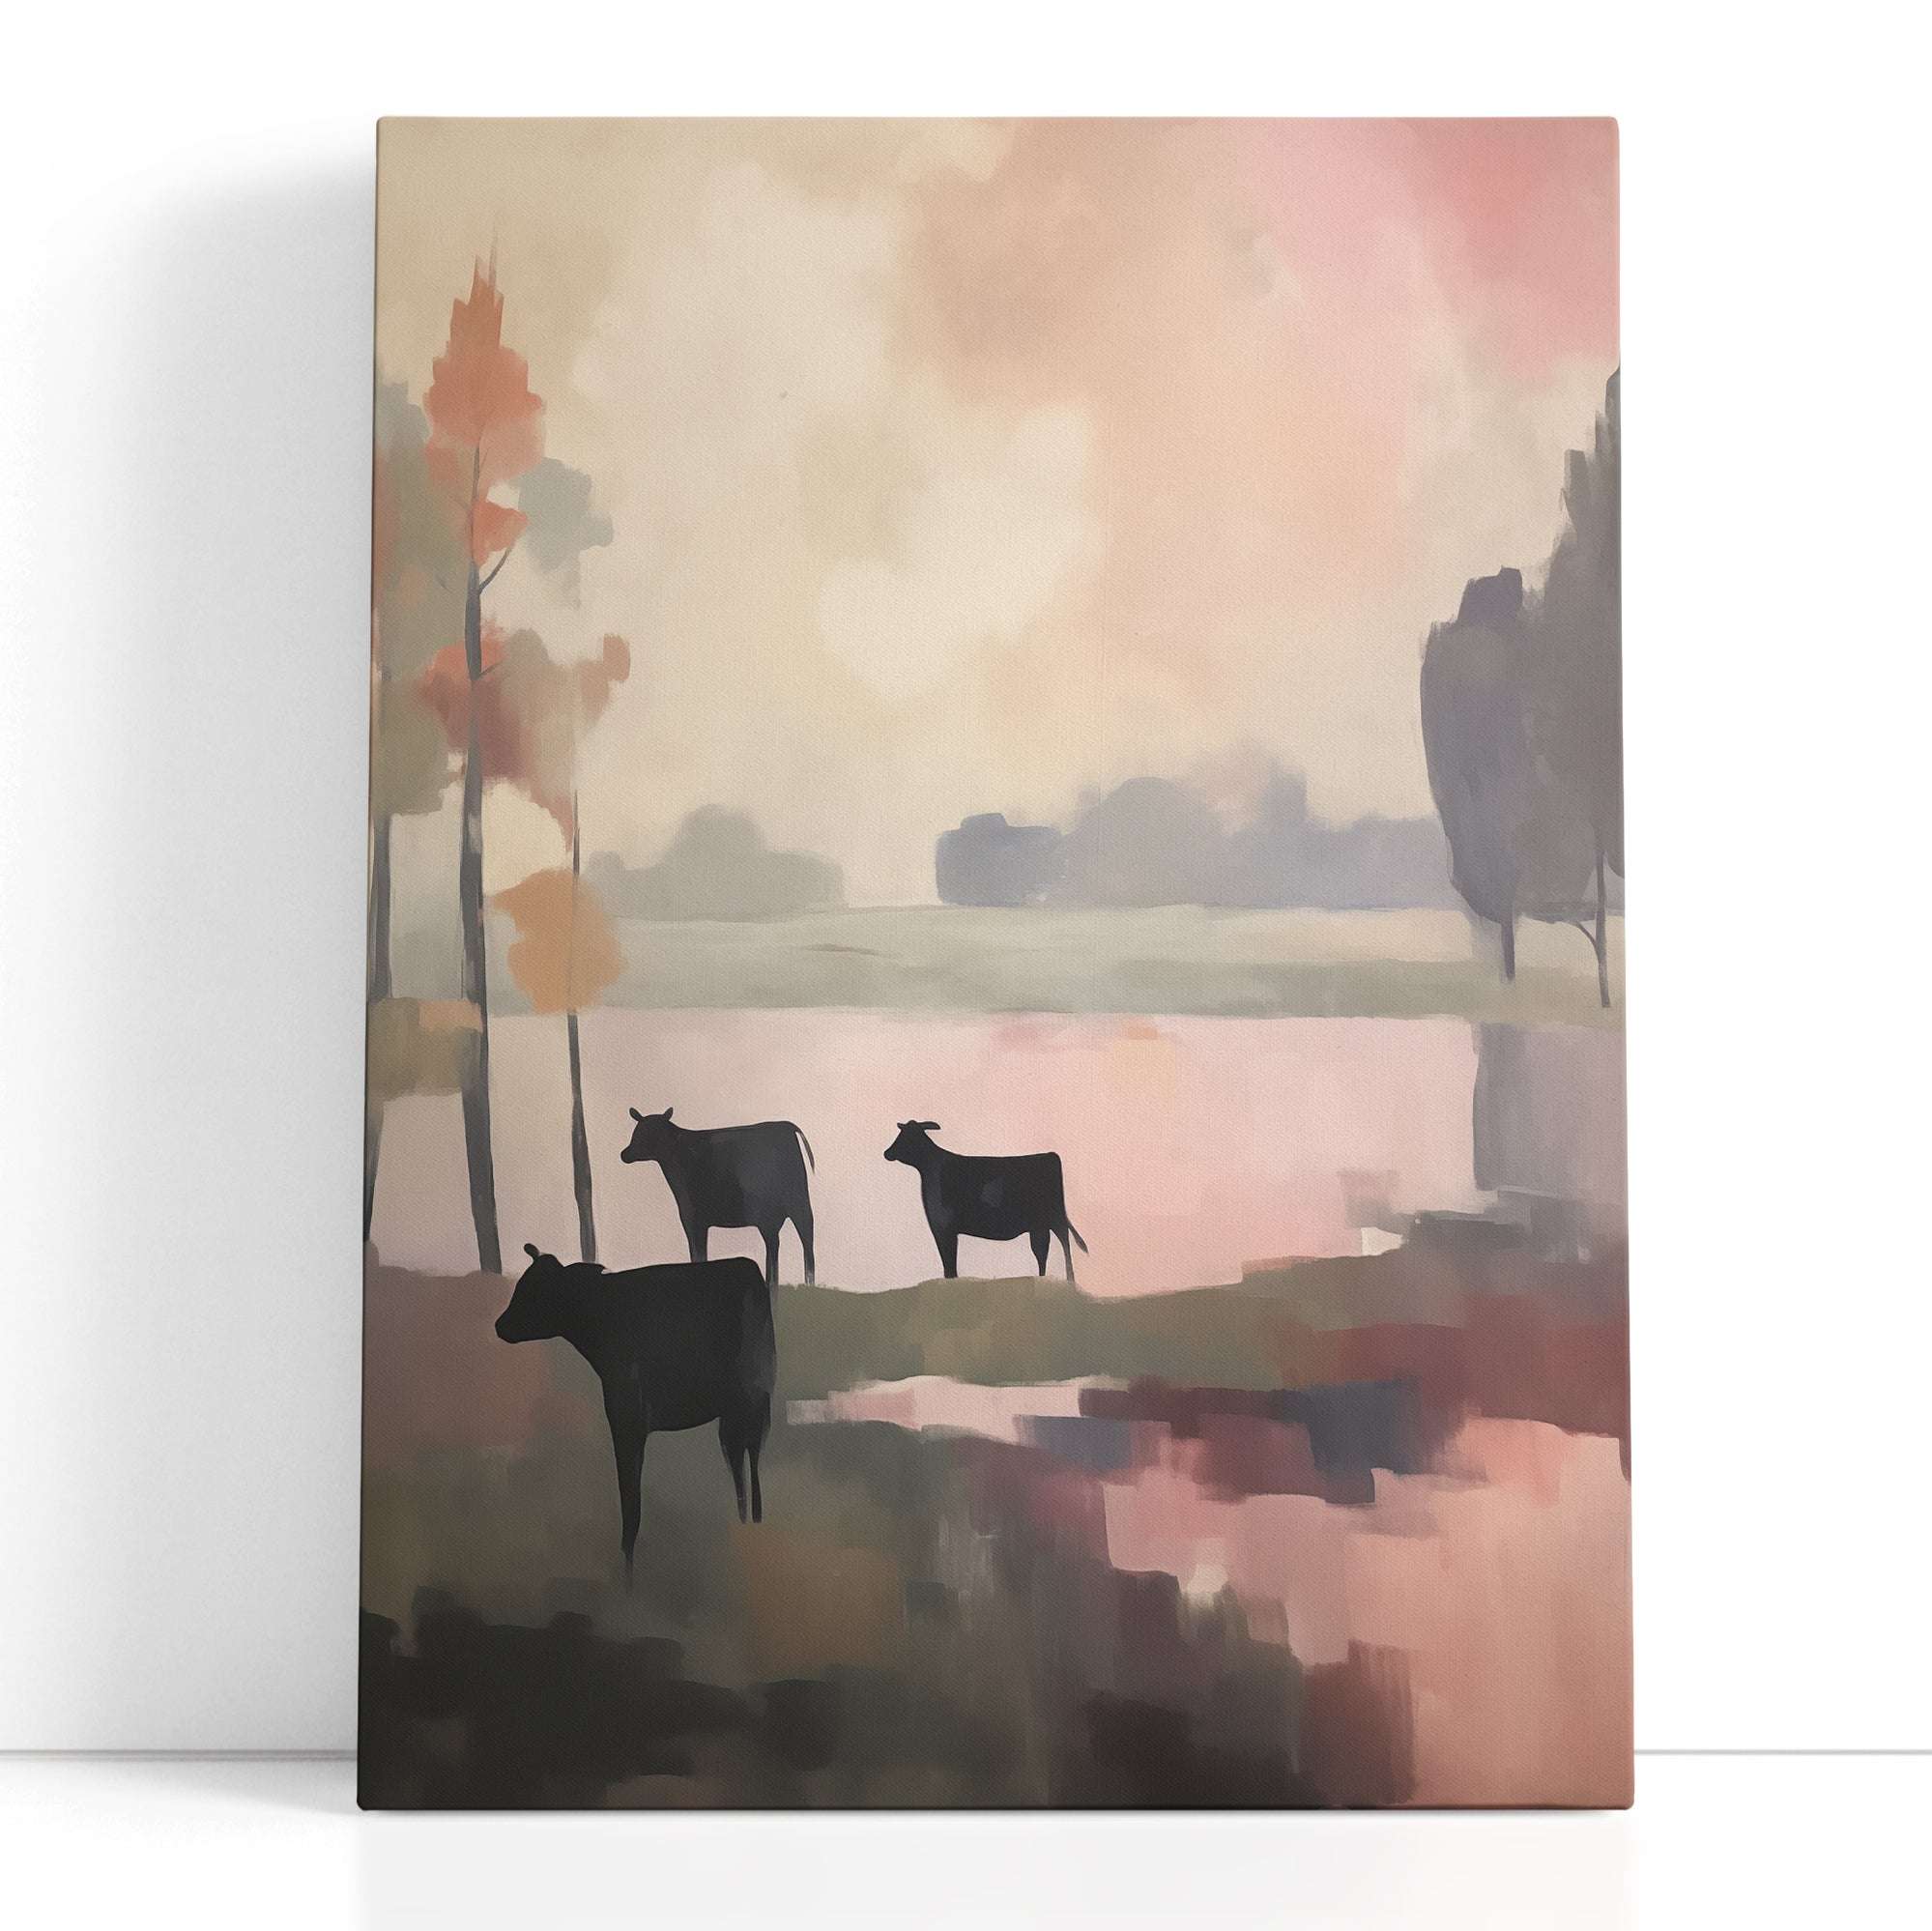 Pastoral Scene at Dusk with Cow Silhouettes - Canvas Print - Artoholica Ready to Hang Canvas Print